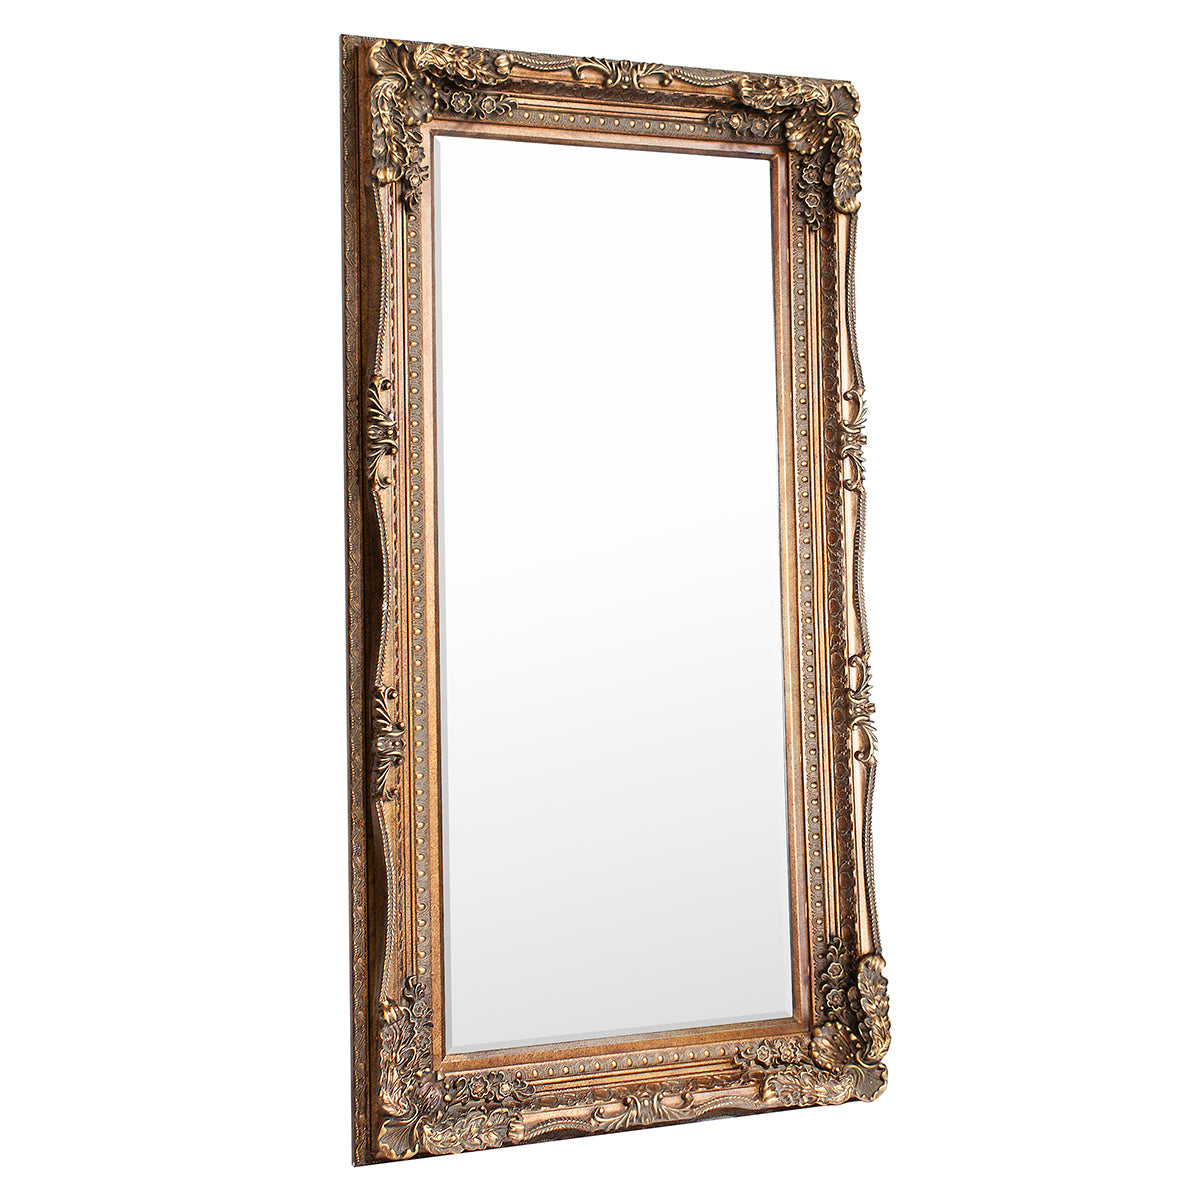 Carved Lewis Leaner Mirror Gold